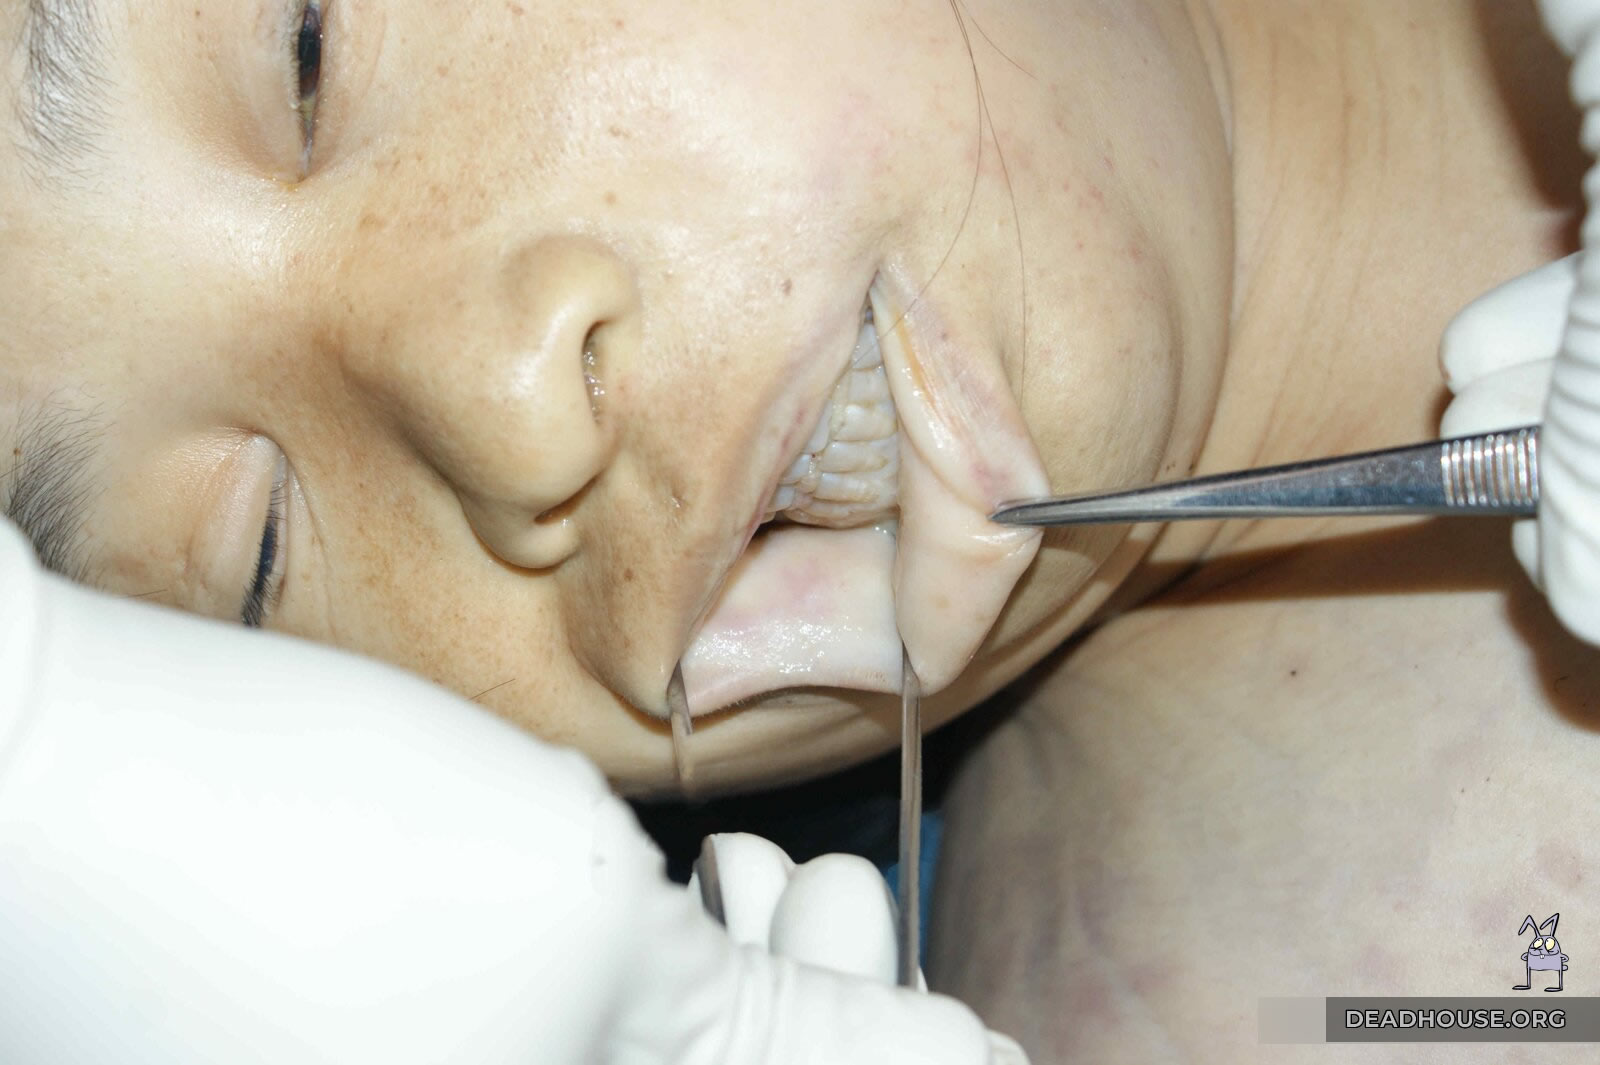 External examination of the gums and lips